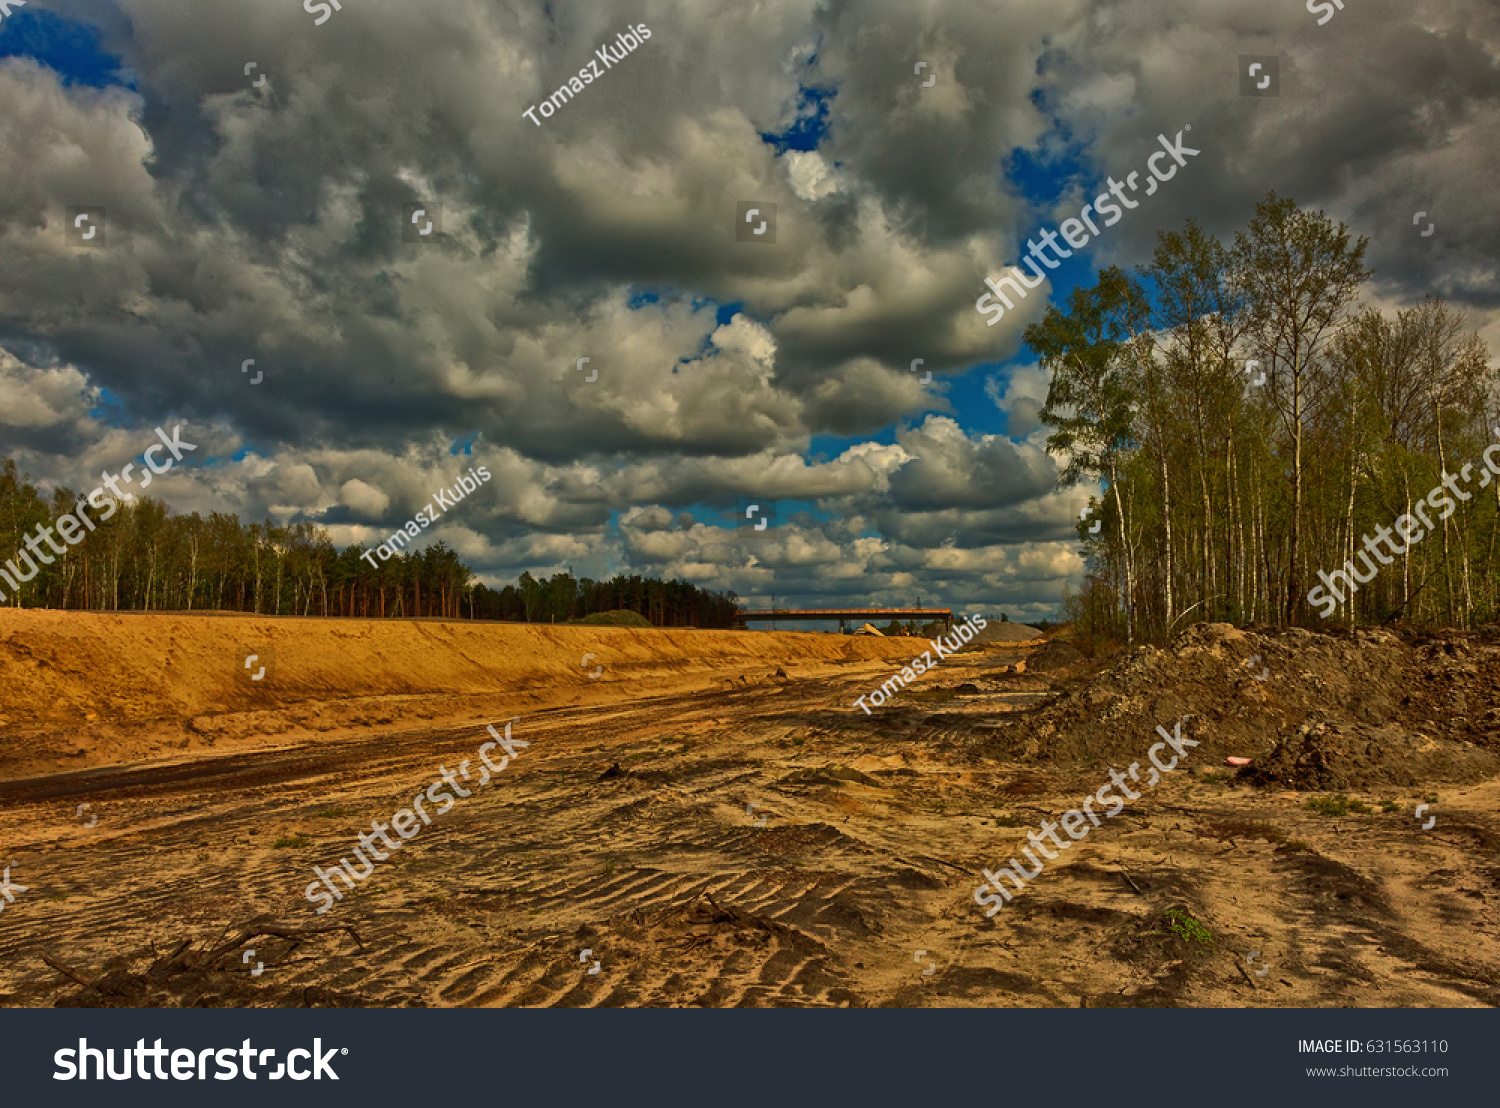 A view from above for the construction of a highway leading through the forest.Poland in april.Photography in HDR technique using special filters. Horizontal view. #631563110